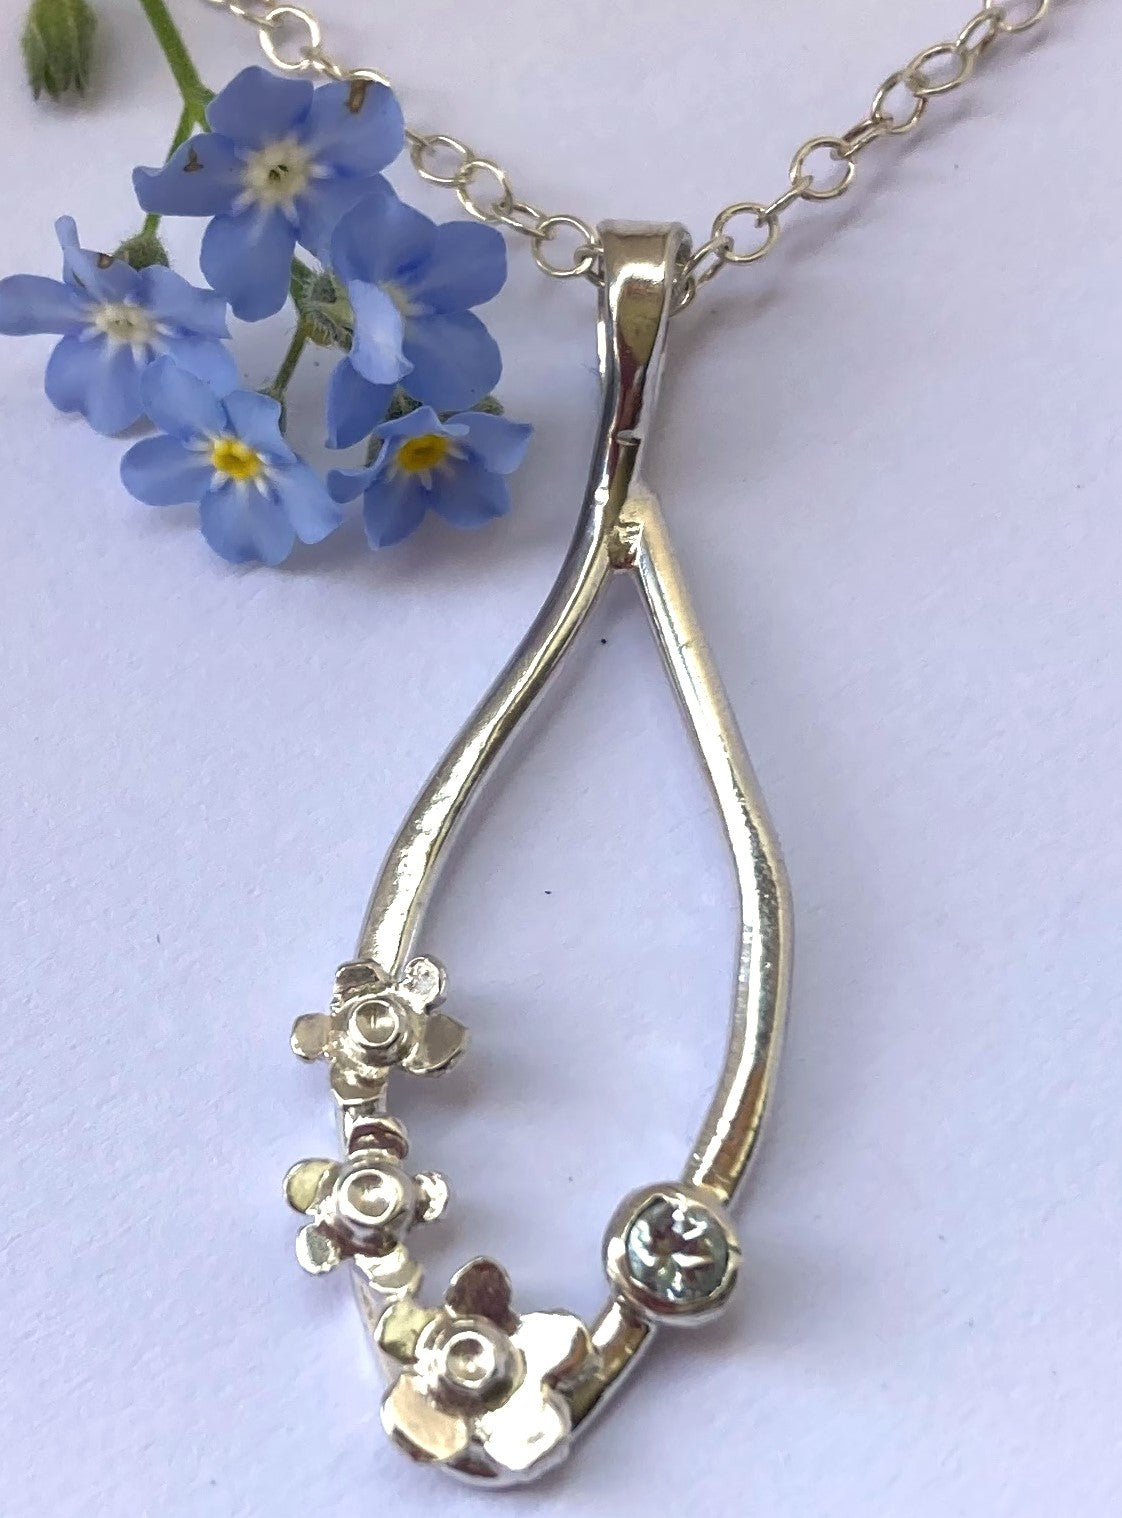 real blue forget-me-not flowers with wire pendant decorated in small flowers with a blue gemstone